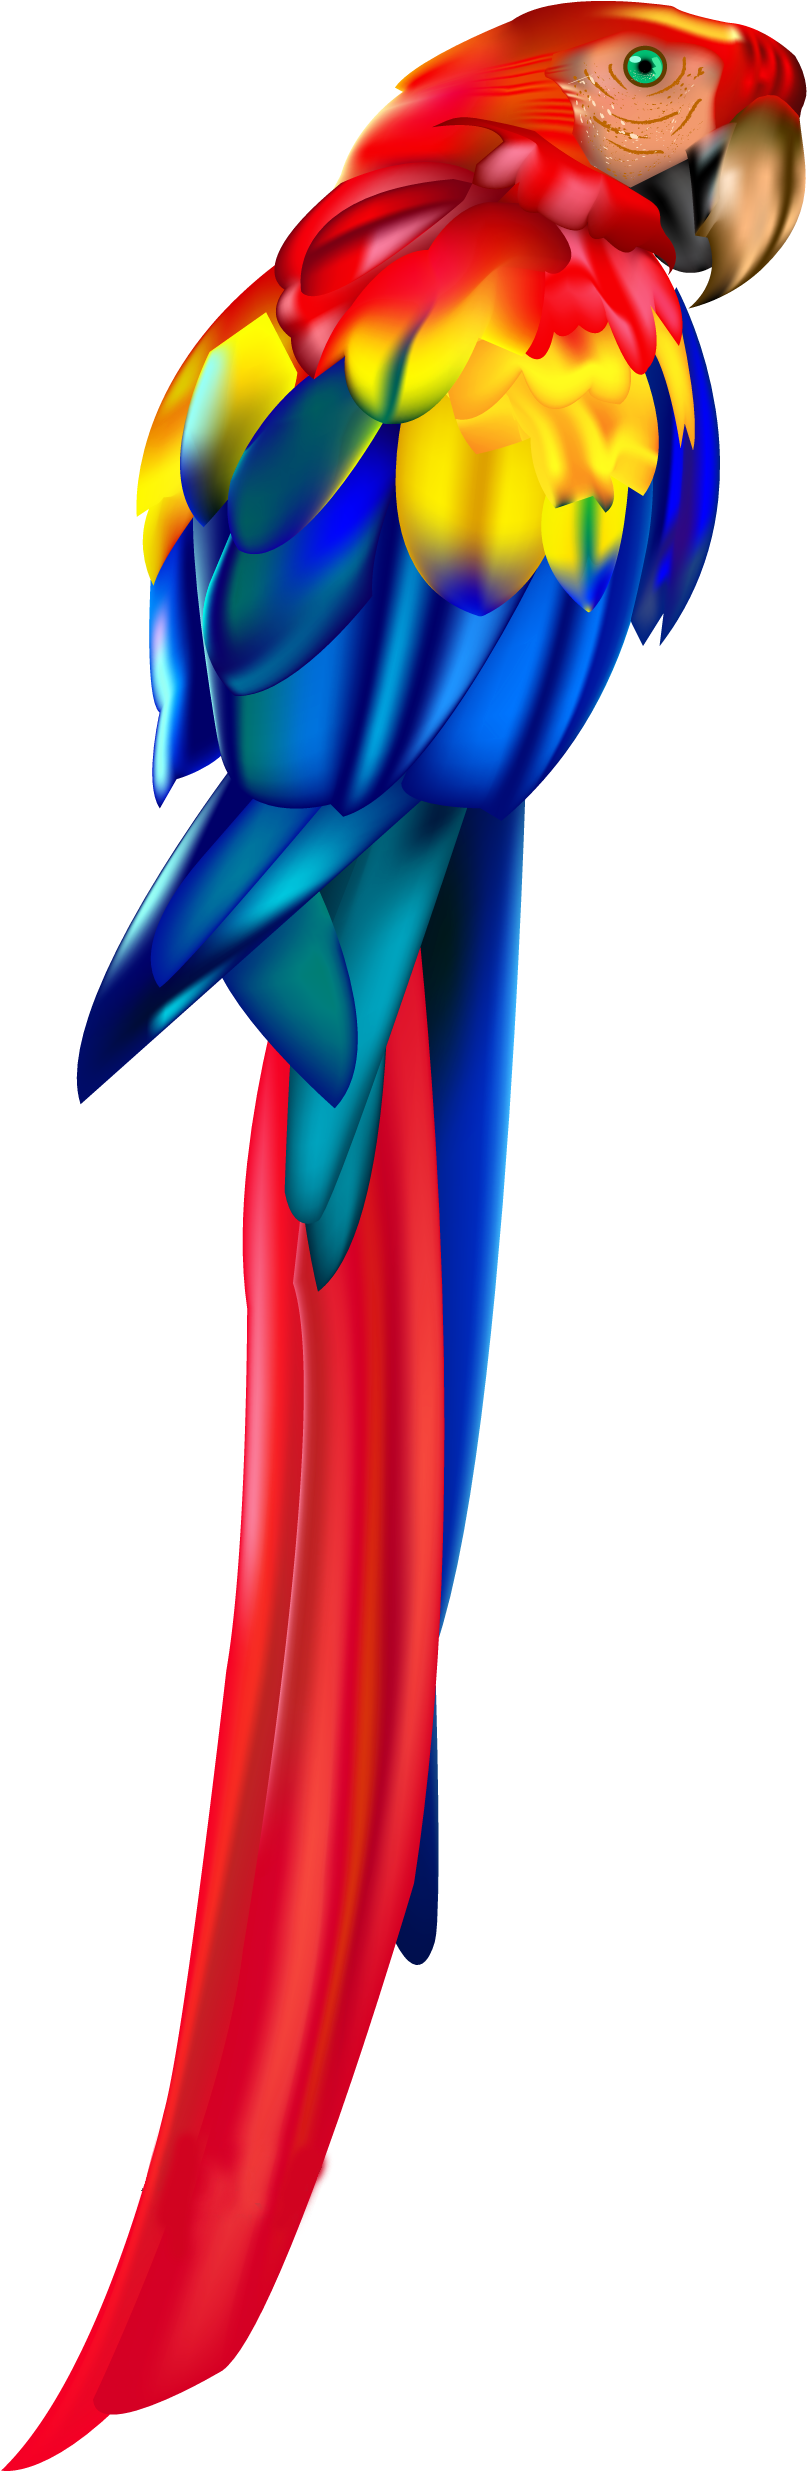 Colorful Macaw Parrot Profile PNG